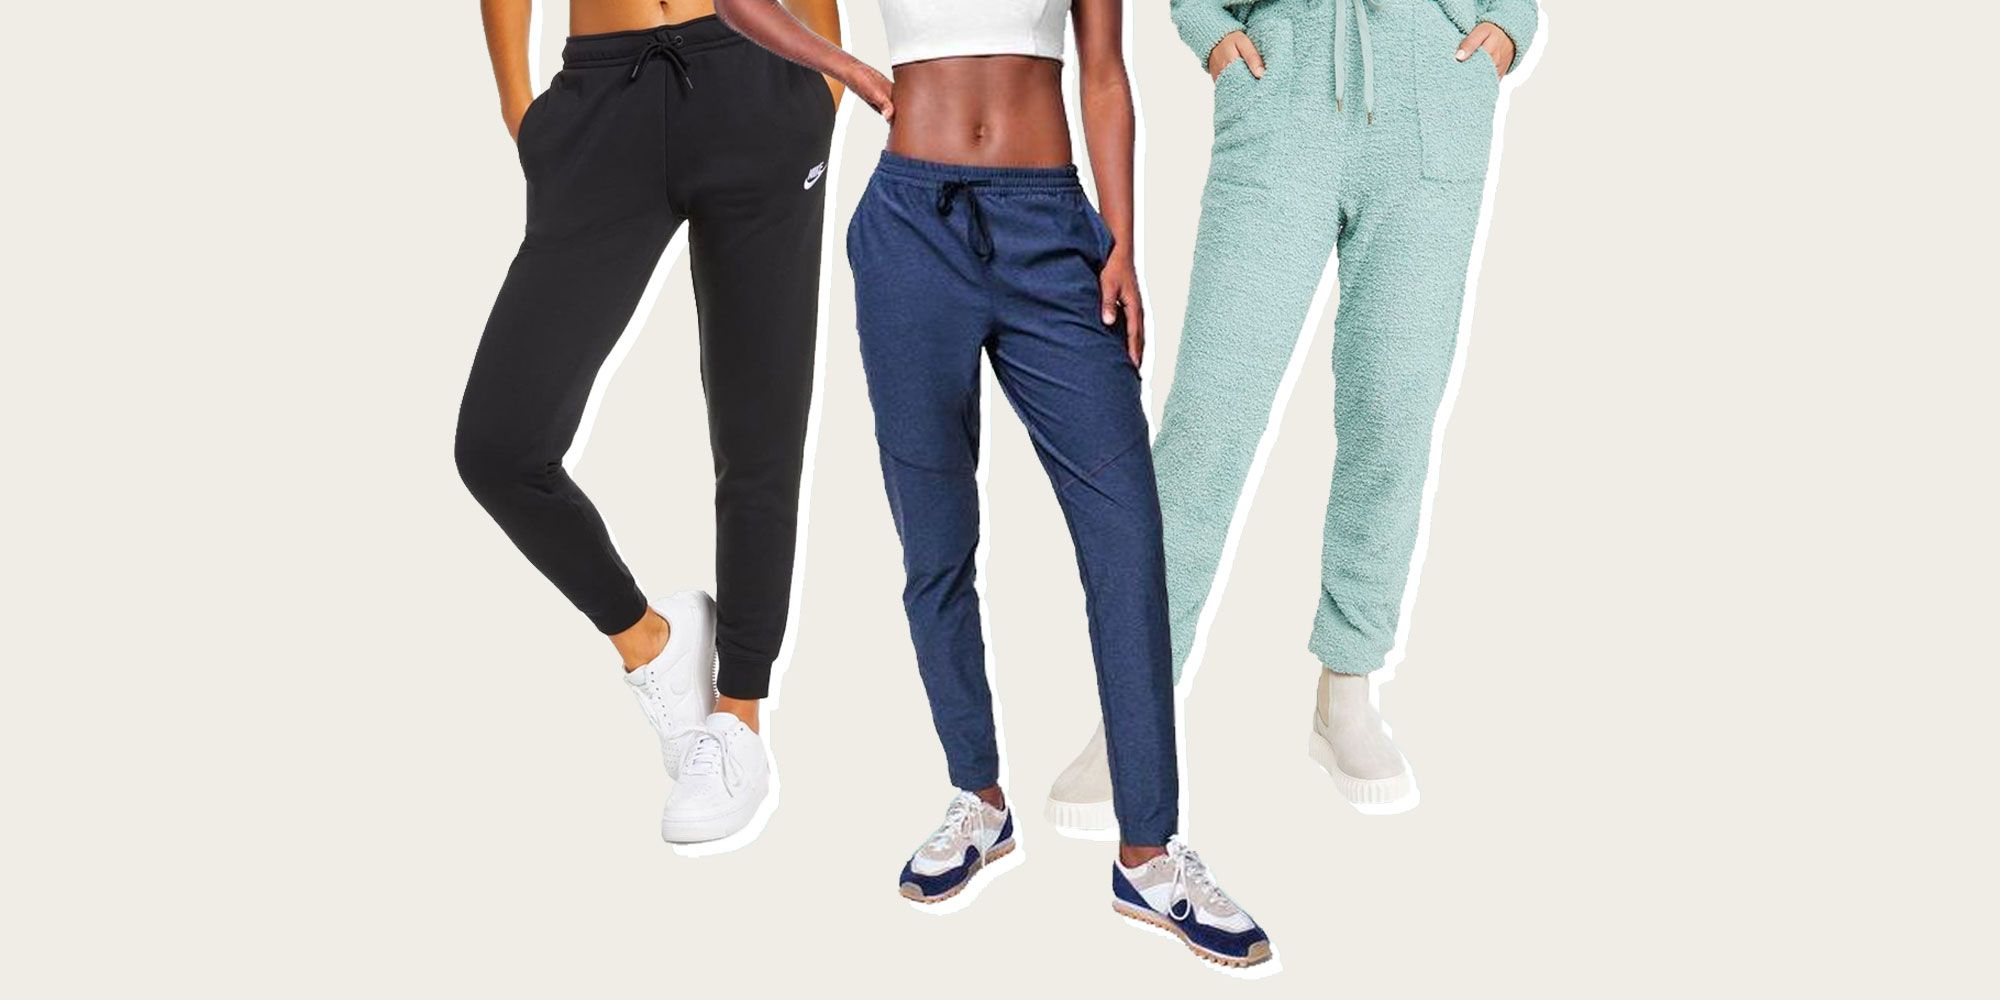 Thin Cotton Track Pants Factory Sale, UP TO 67% OFF | www 